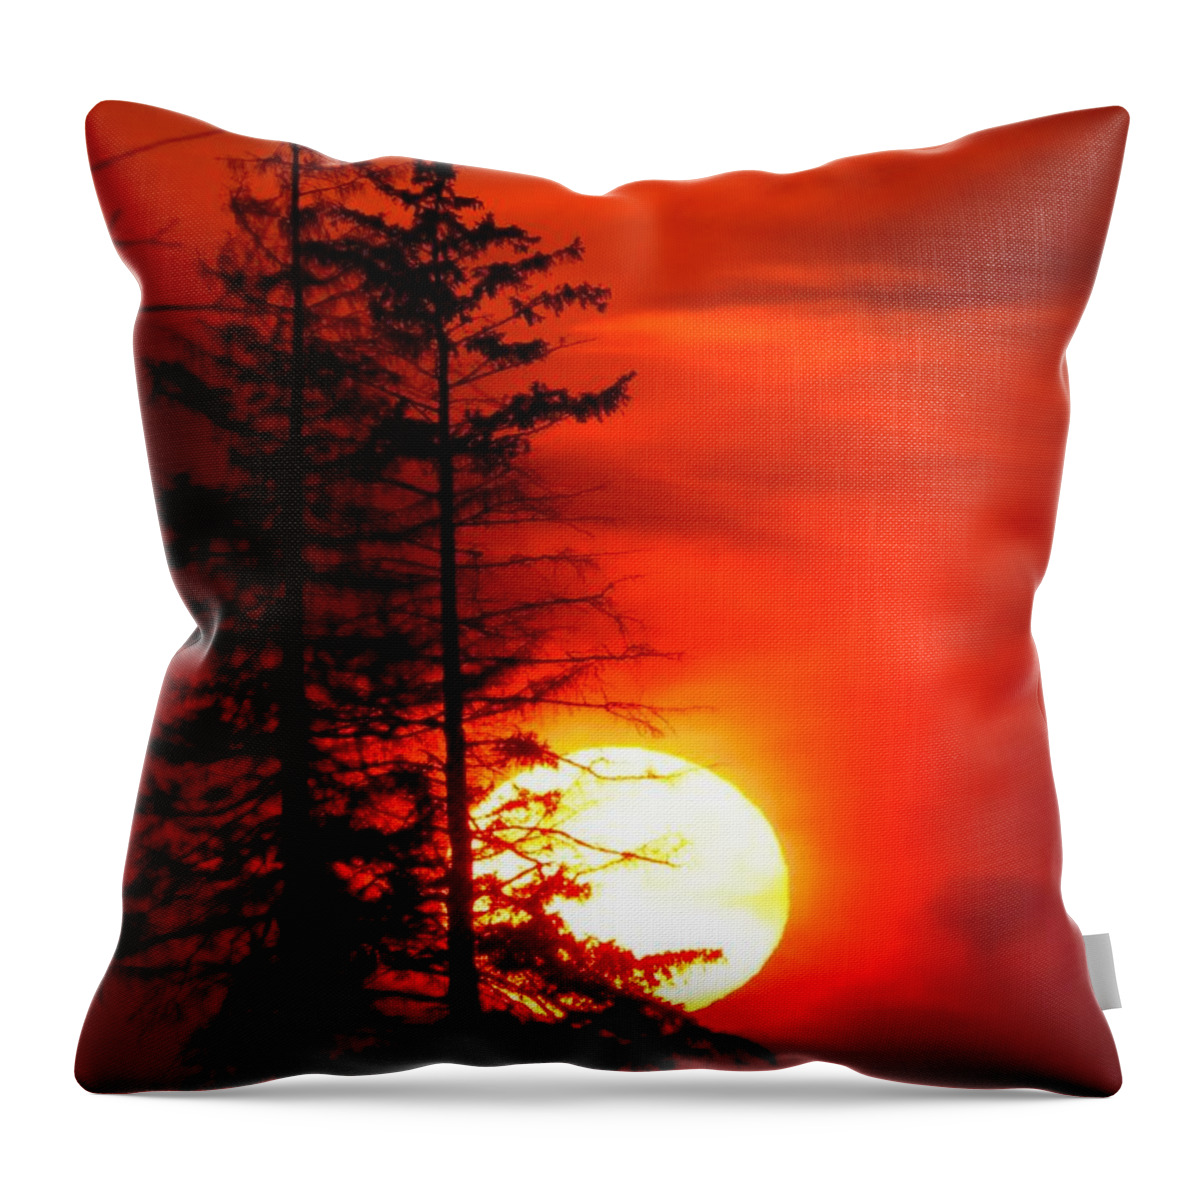 Sunset Throw Pillow featuring the photograph A Dramatic Ending by Lori Frisch